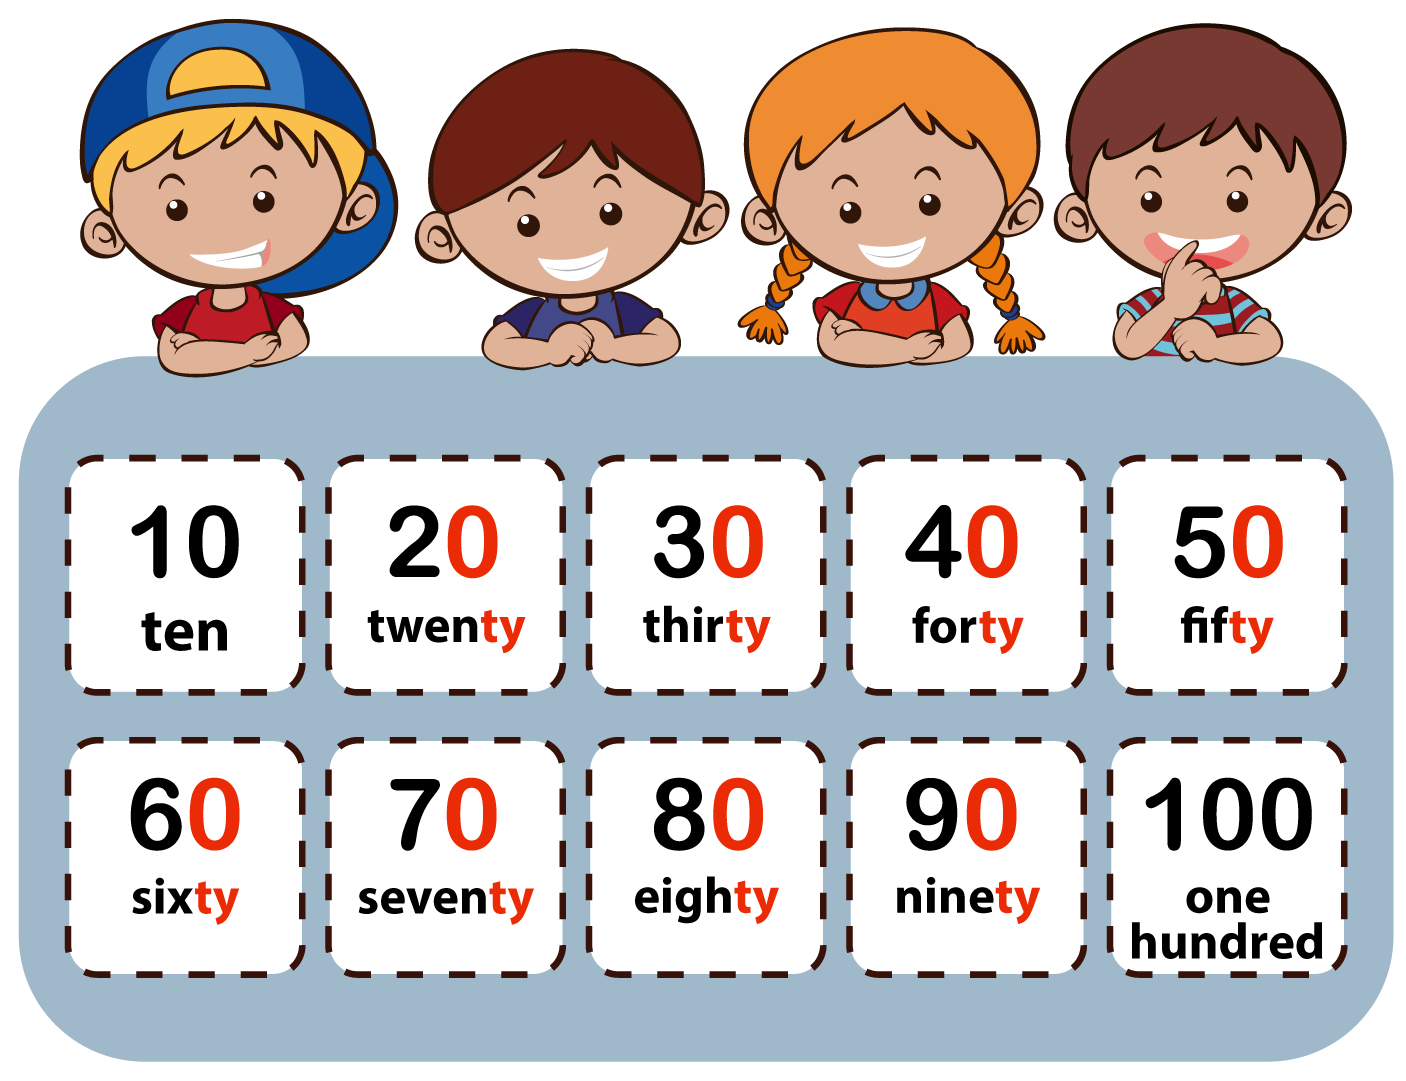 Maths Digits Up To 100 Level 1 Activity For Kids PrimaryLeap co uk